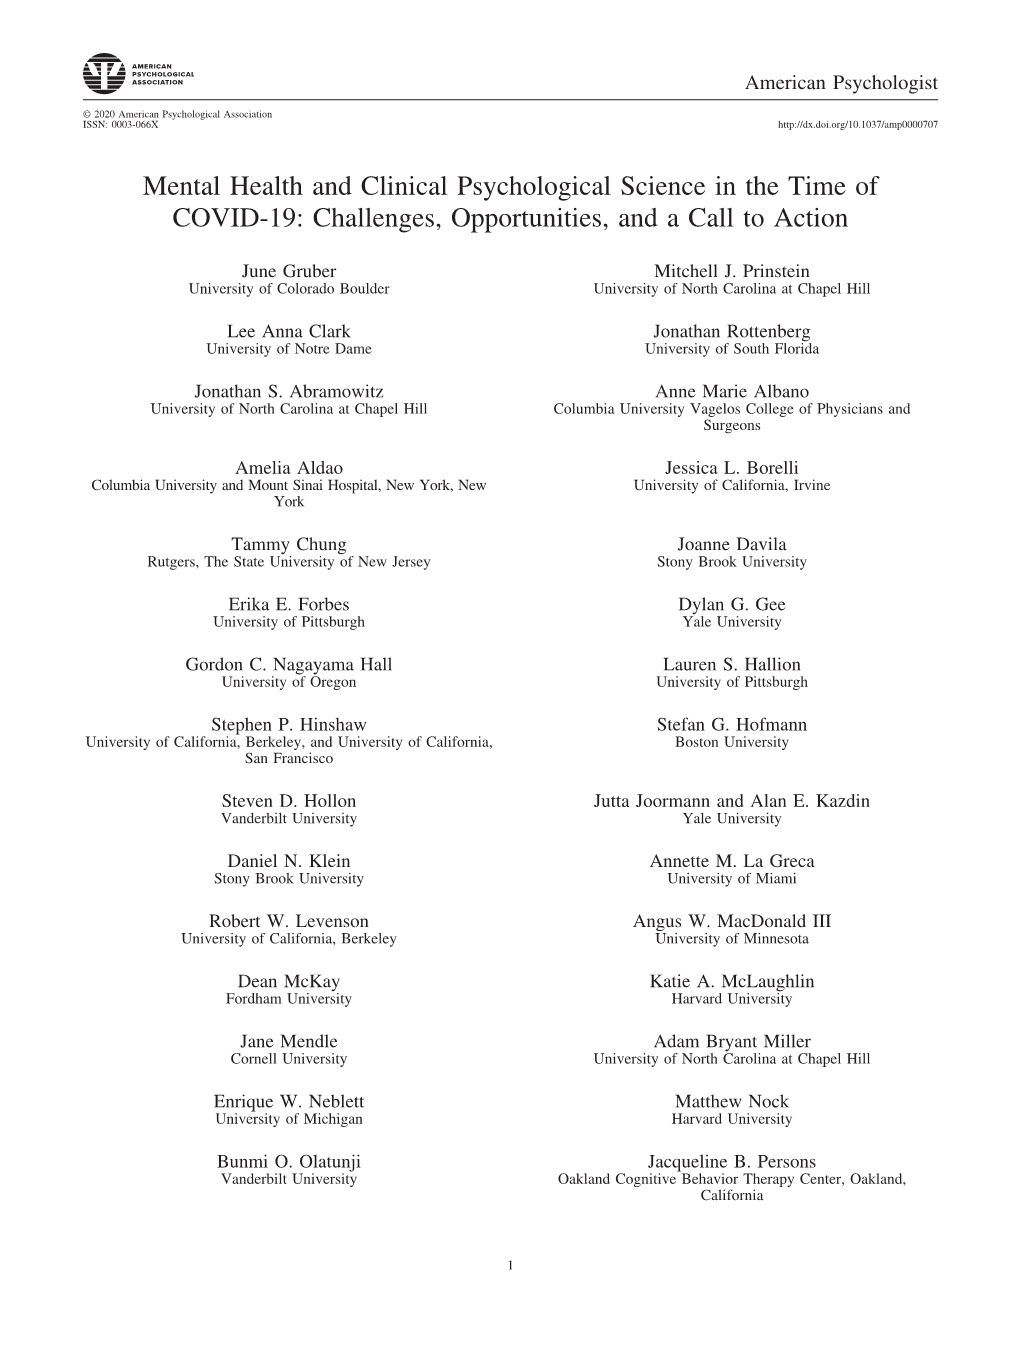 Mental Health and Clinical Psychological Science in the Time of COVID-19: Challenges, Opportunities, and a Call to Action